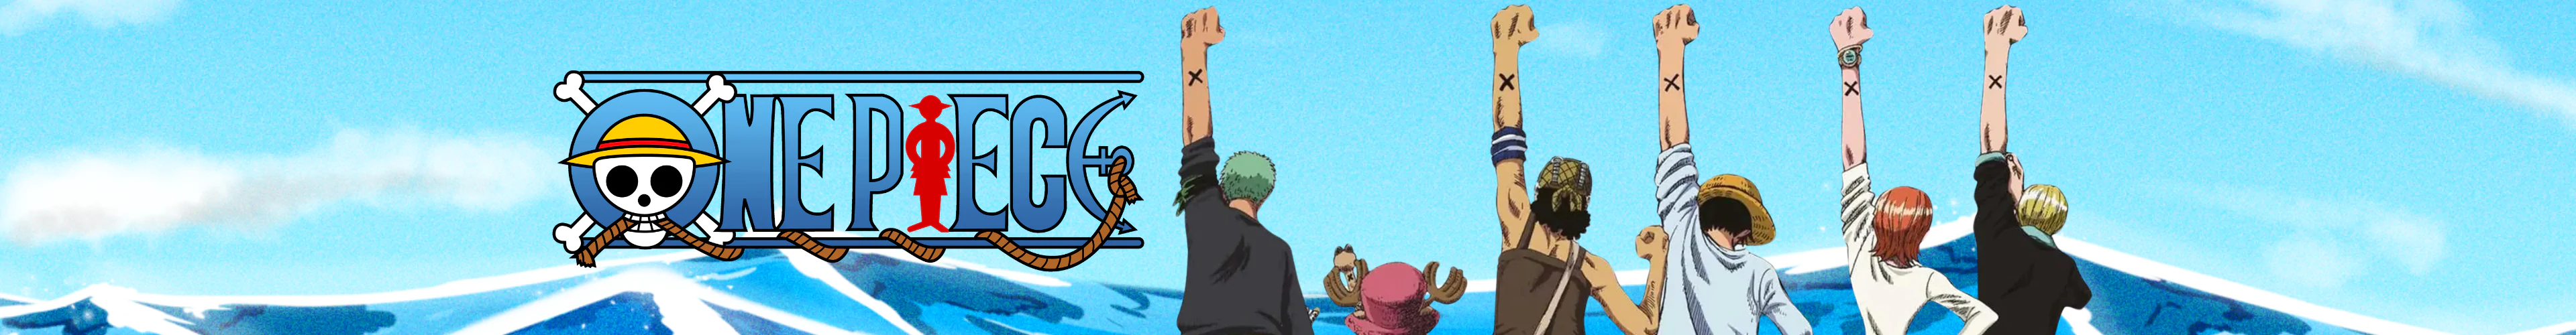 One Piece towels banner